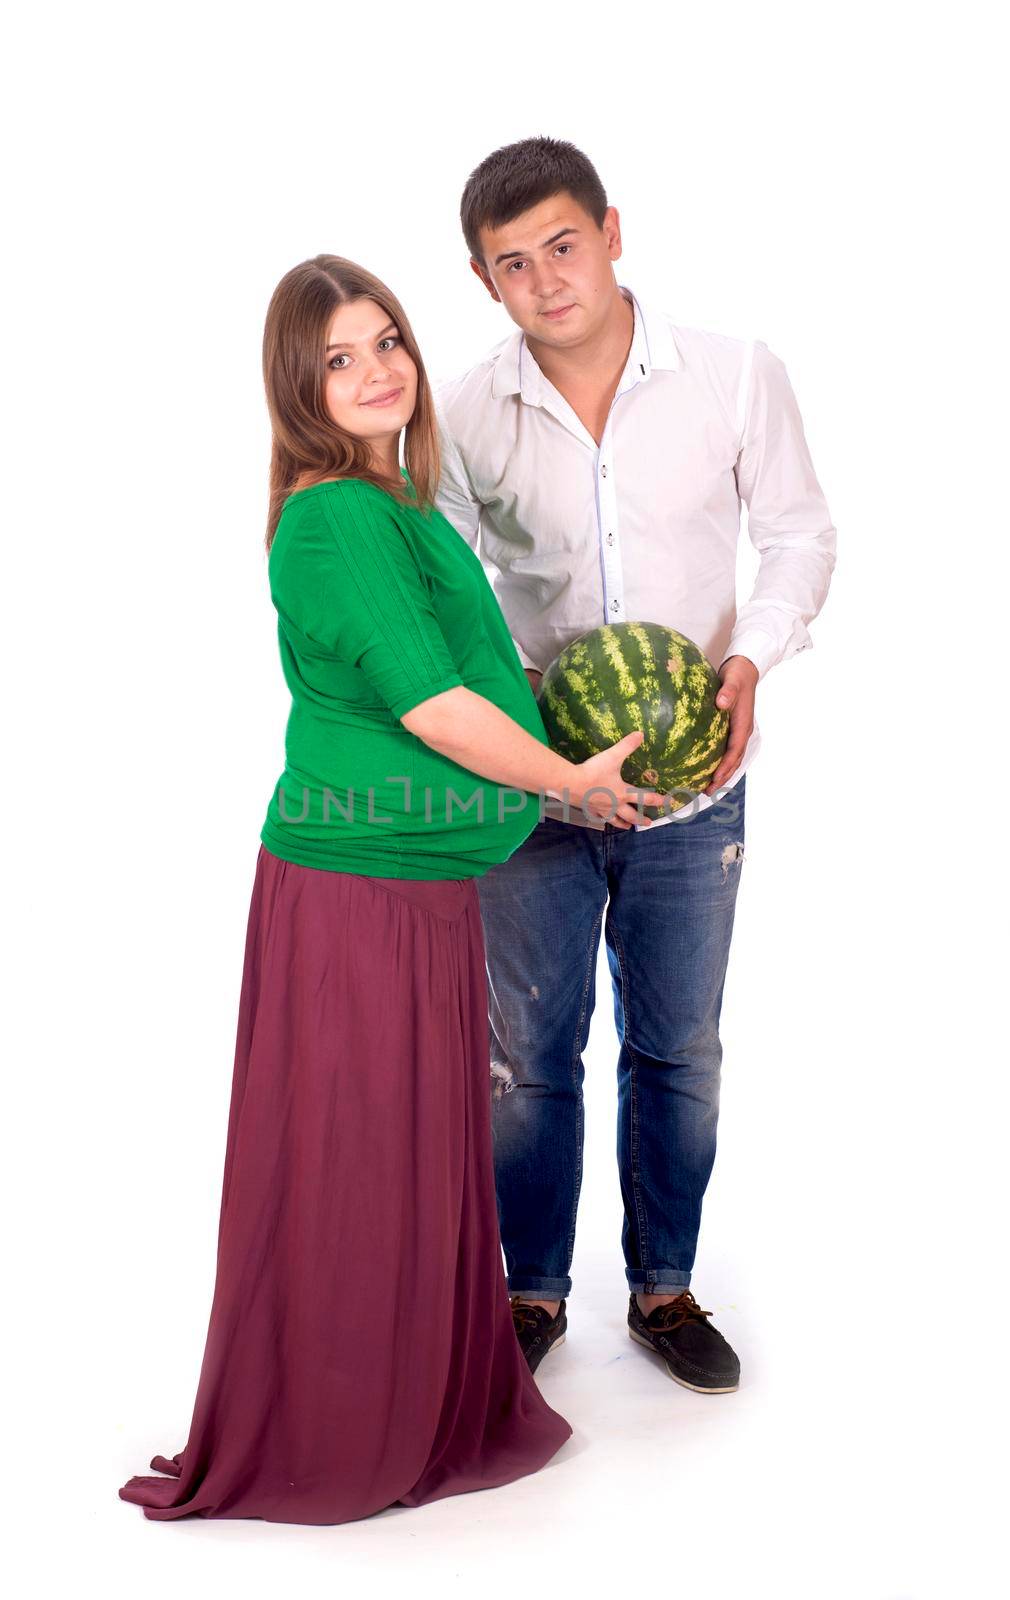 A man and a pregnant woman are holding a large watermelon in their hands. isolated on white background by aprilphoto